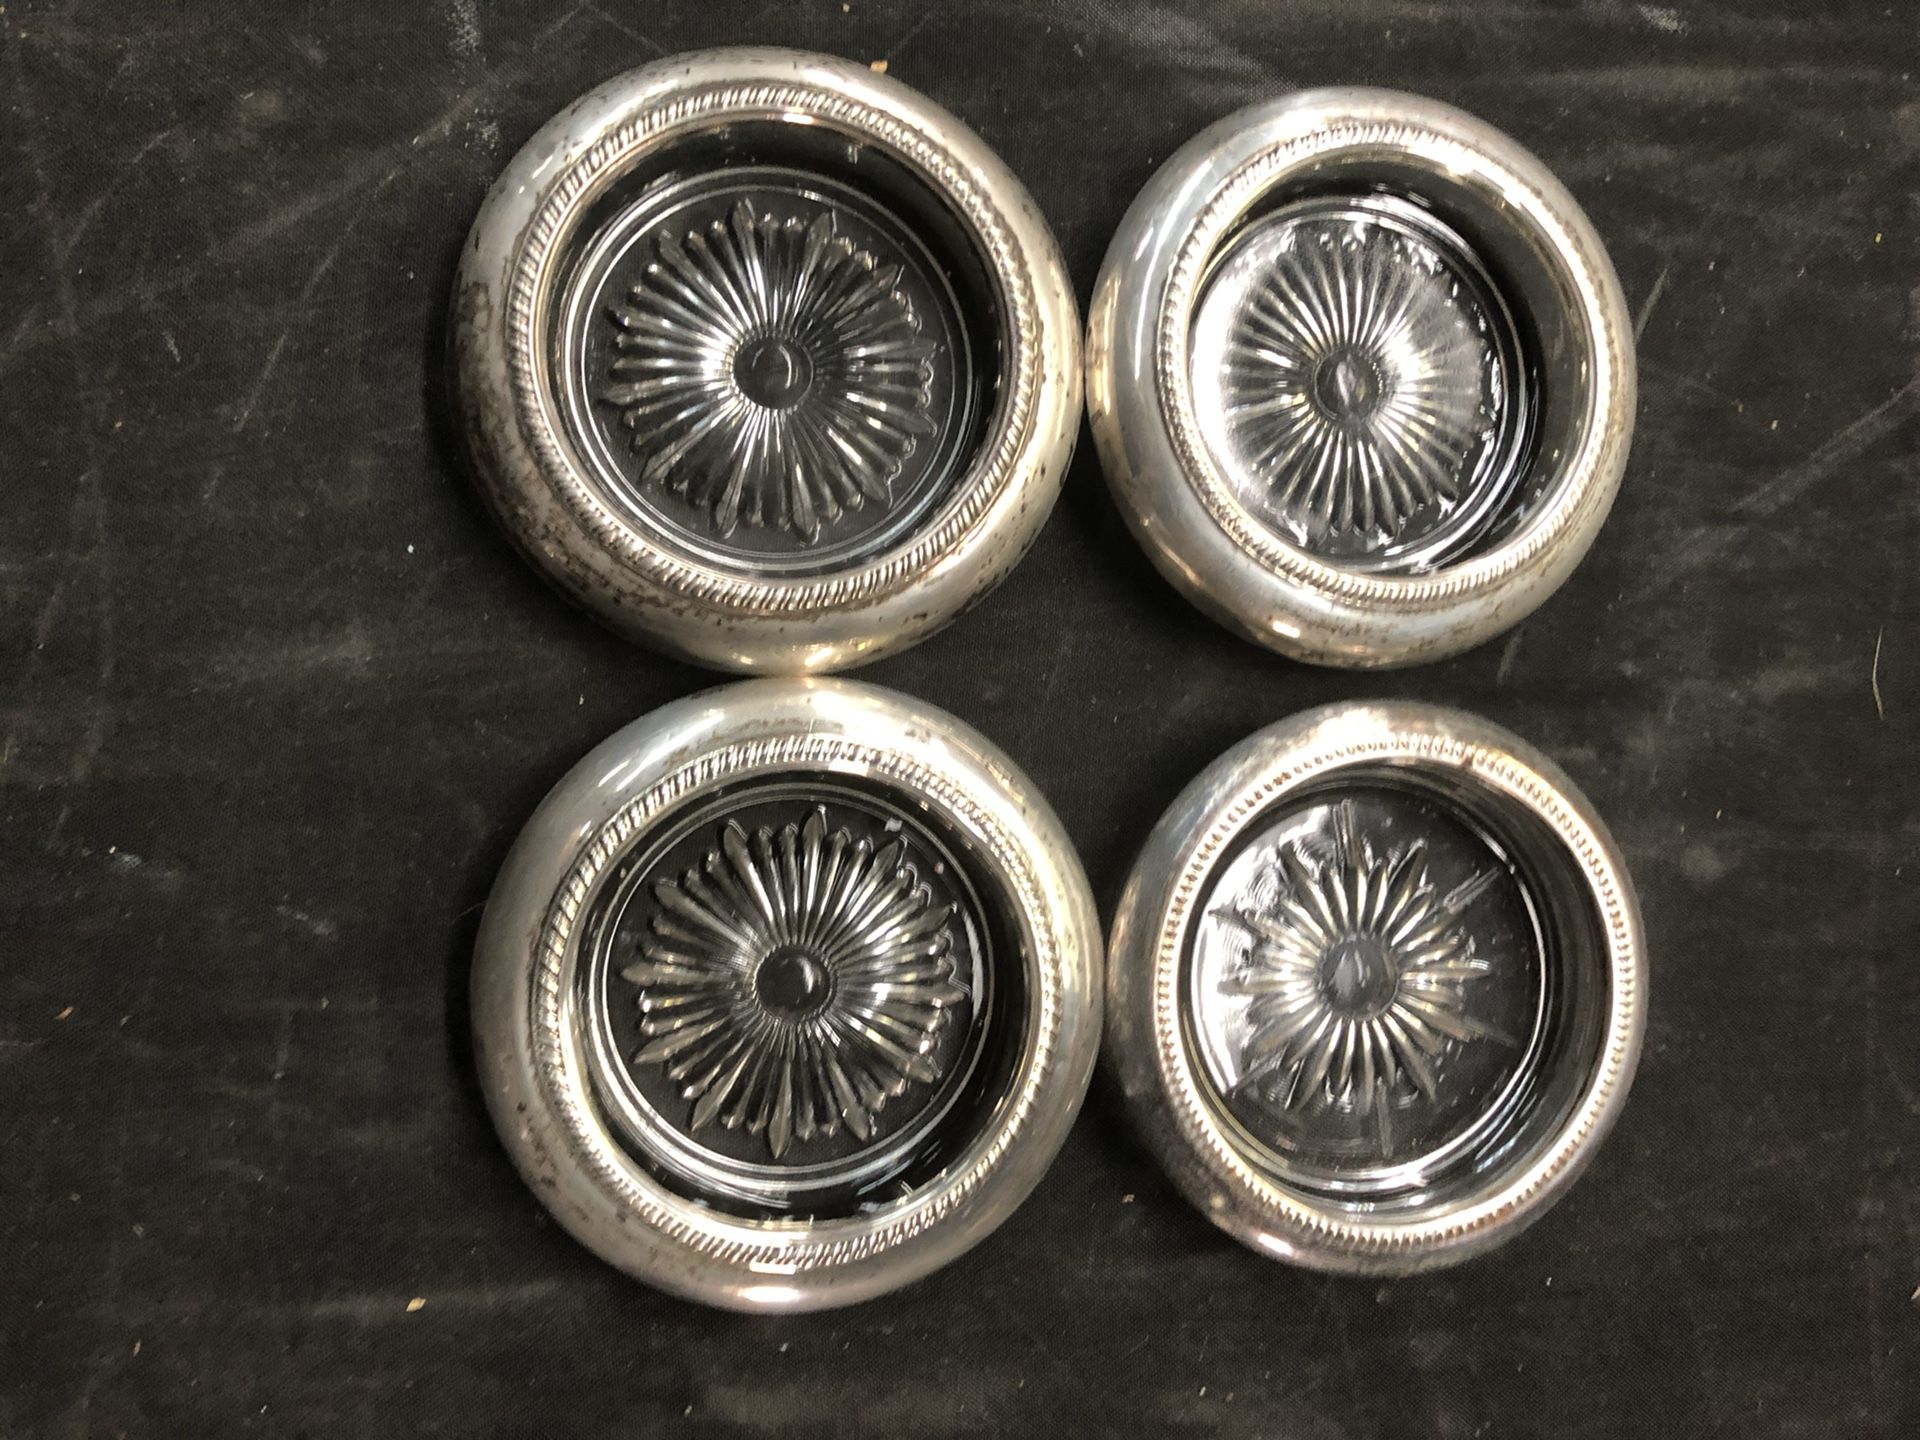 Antique silver-plate glass coasters